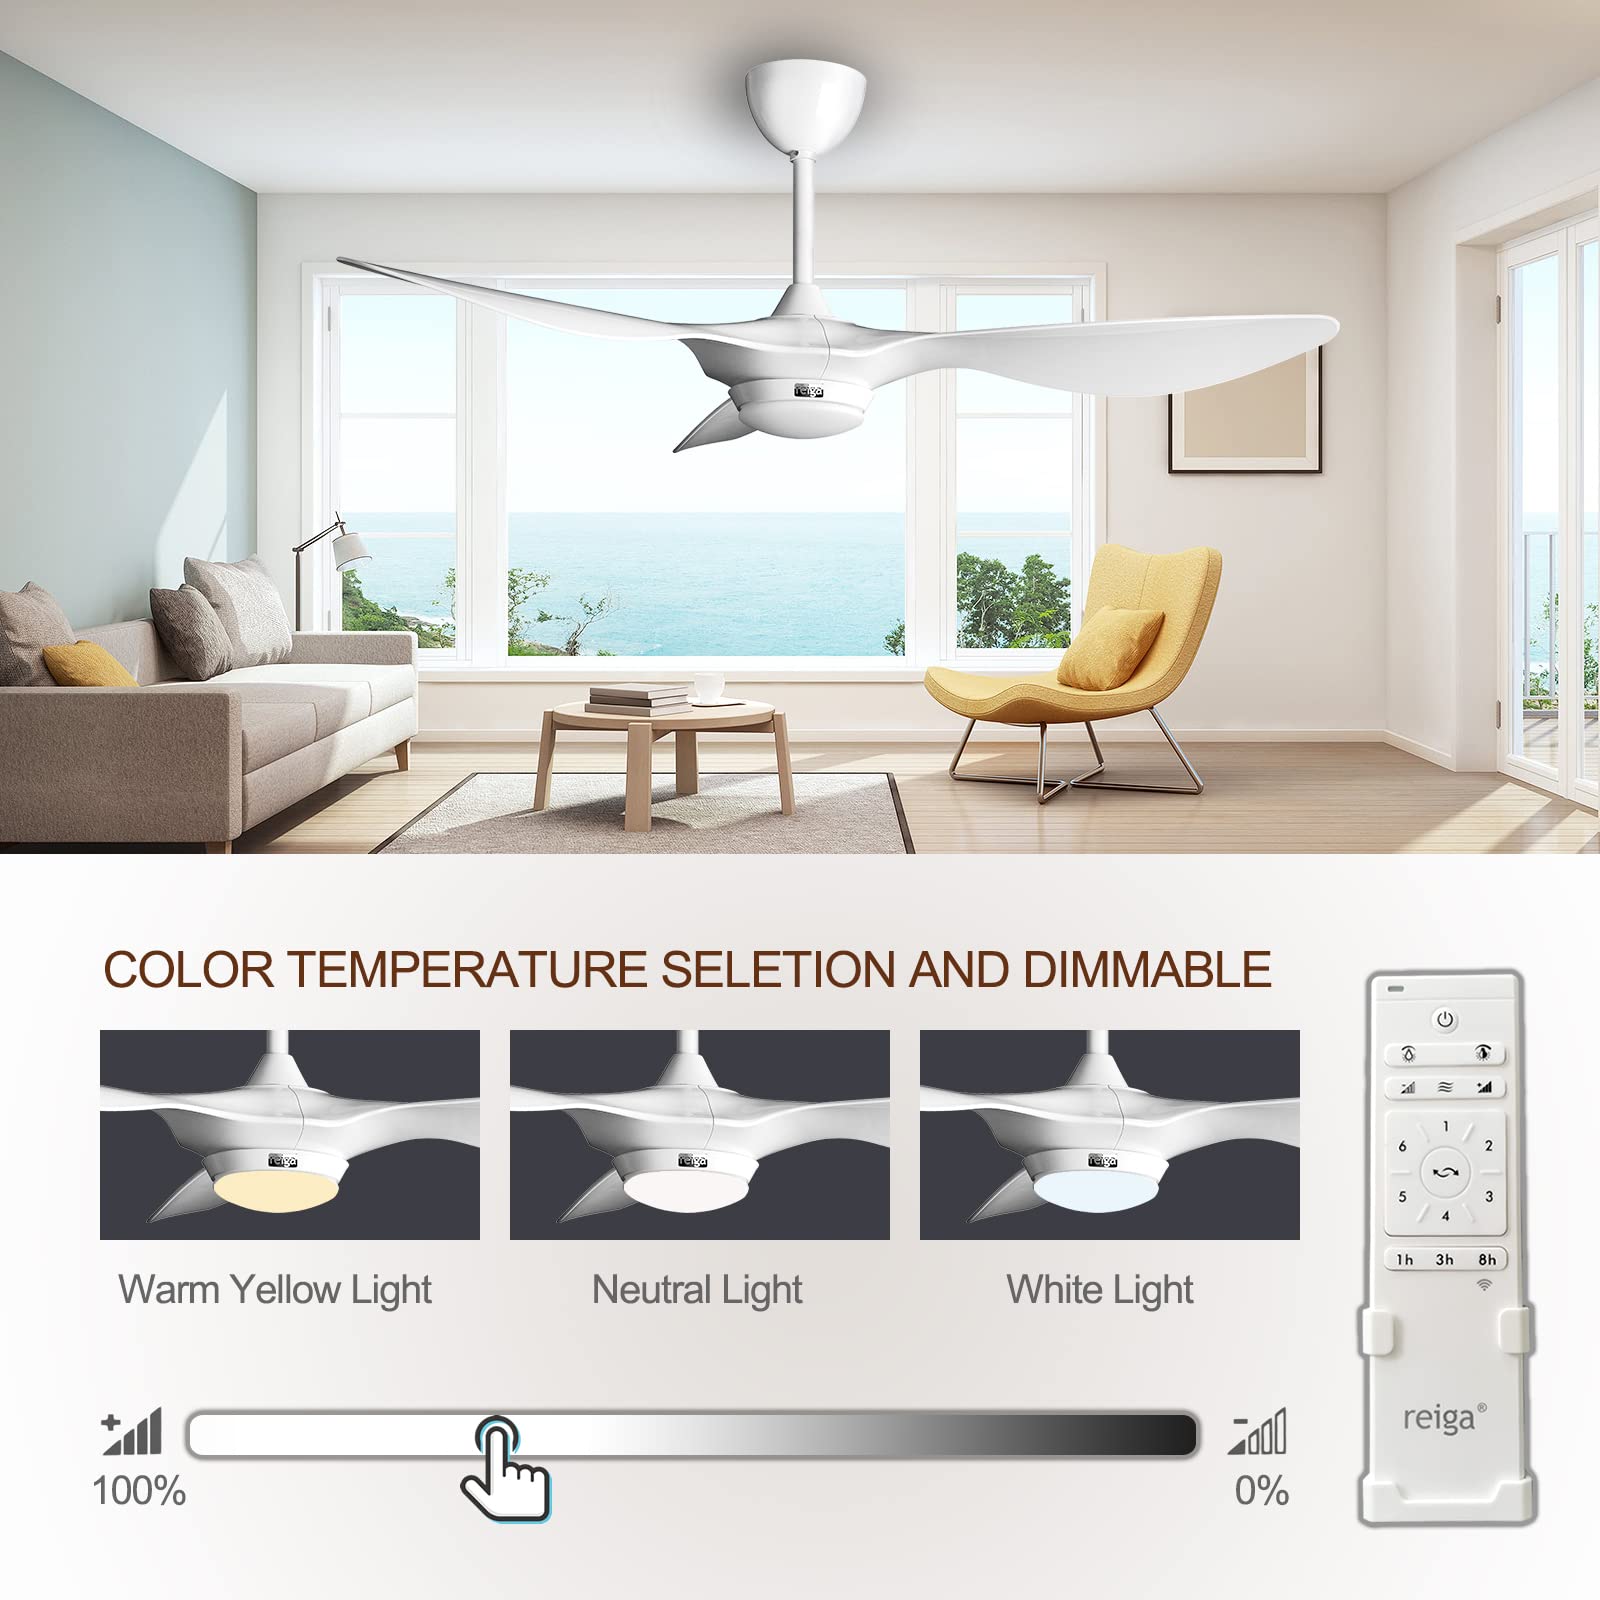 reiga 52-in Modern Bright White Ceiling Fan with Dimmable Light and Remote Control, 3 Blades Ceiling Fans Reversible Quiet DC ETL Motor, 6-Speed, Timer, for Bedroom Living Room and Patio